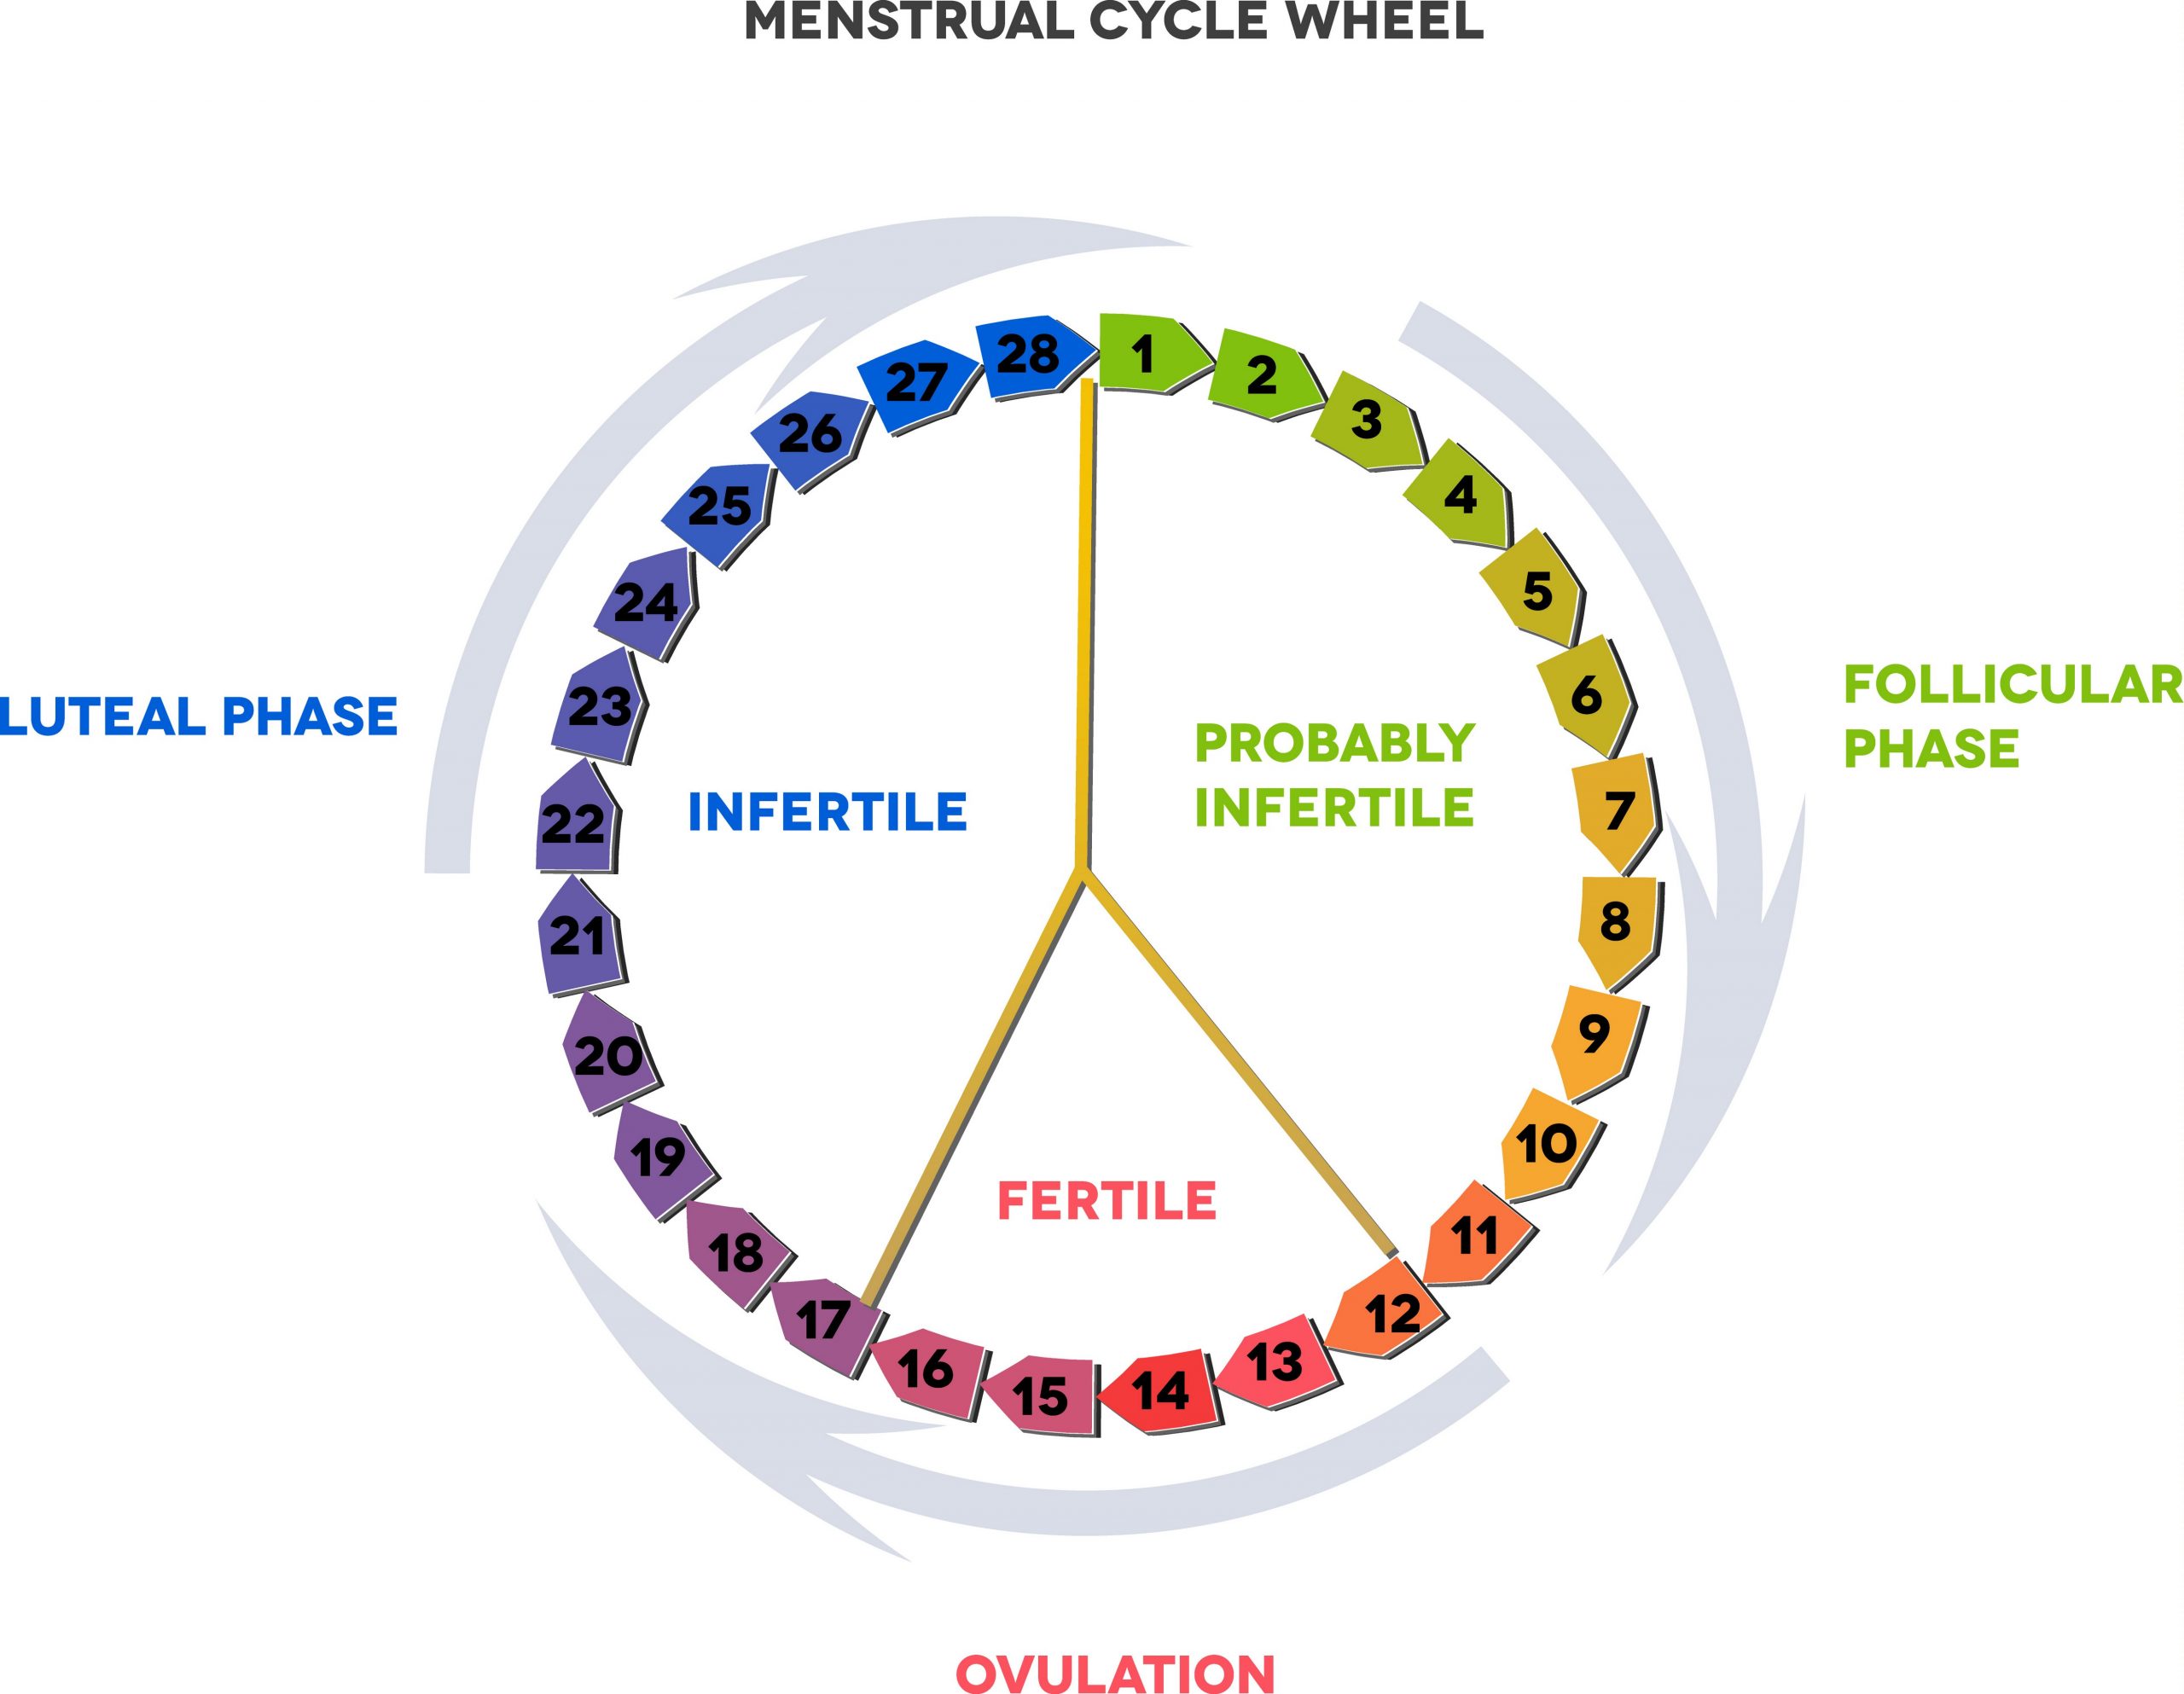 Ever Wondered How Many Months Do You Ovulate? Weve Got the Answer!